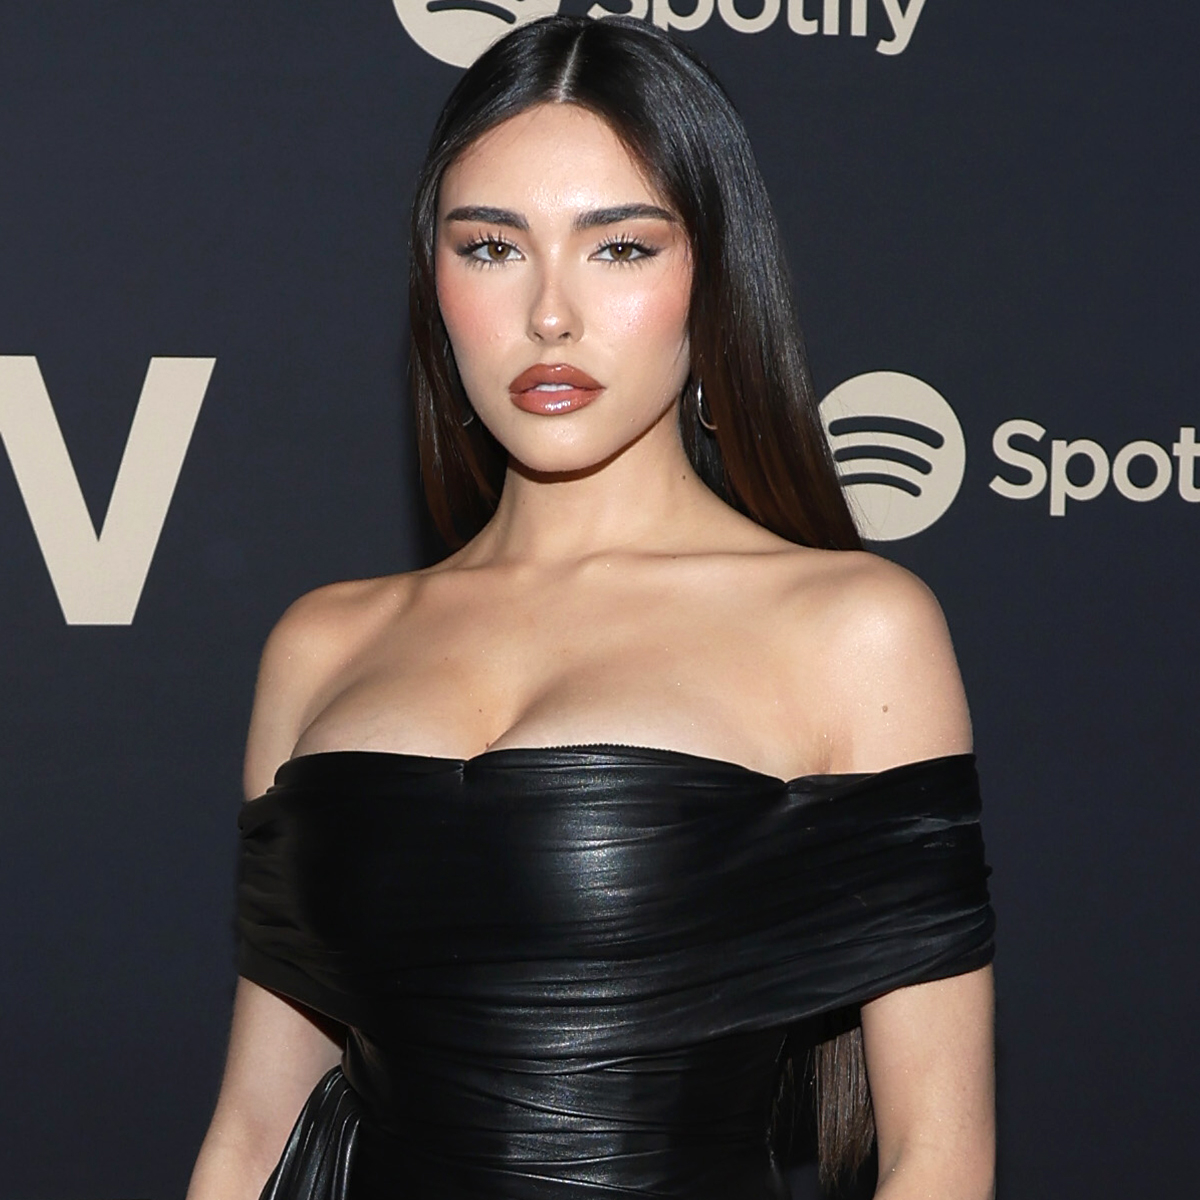 Madison Beer Recalls Trauma of Dealing With Nude Video Leak as a Teen